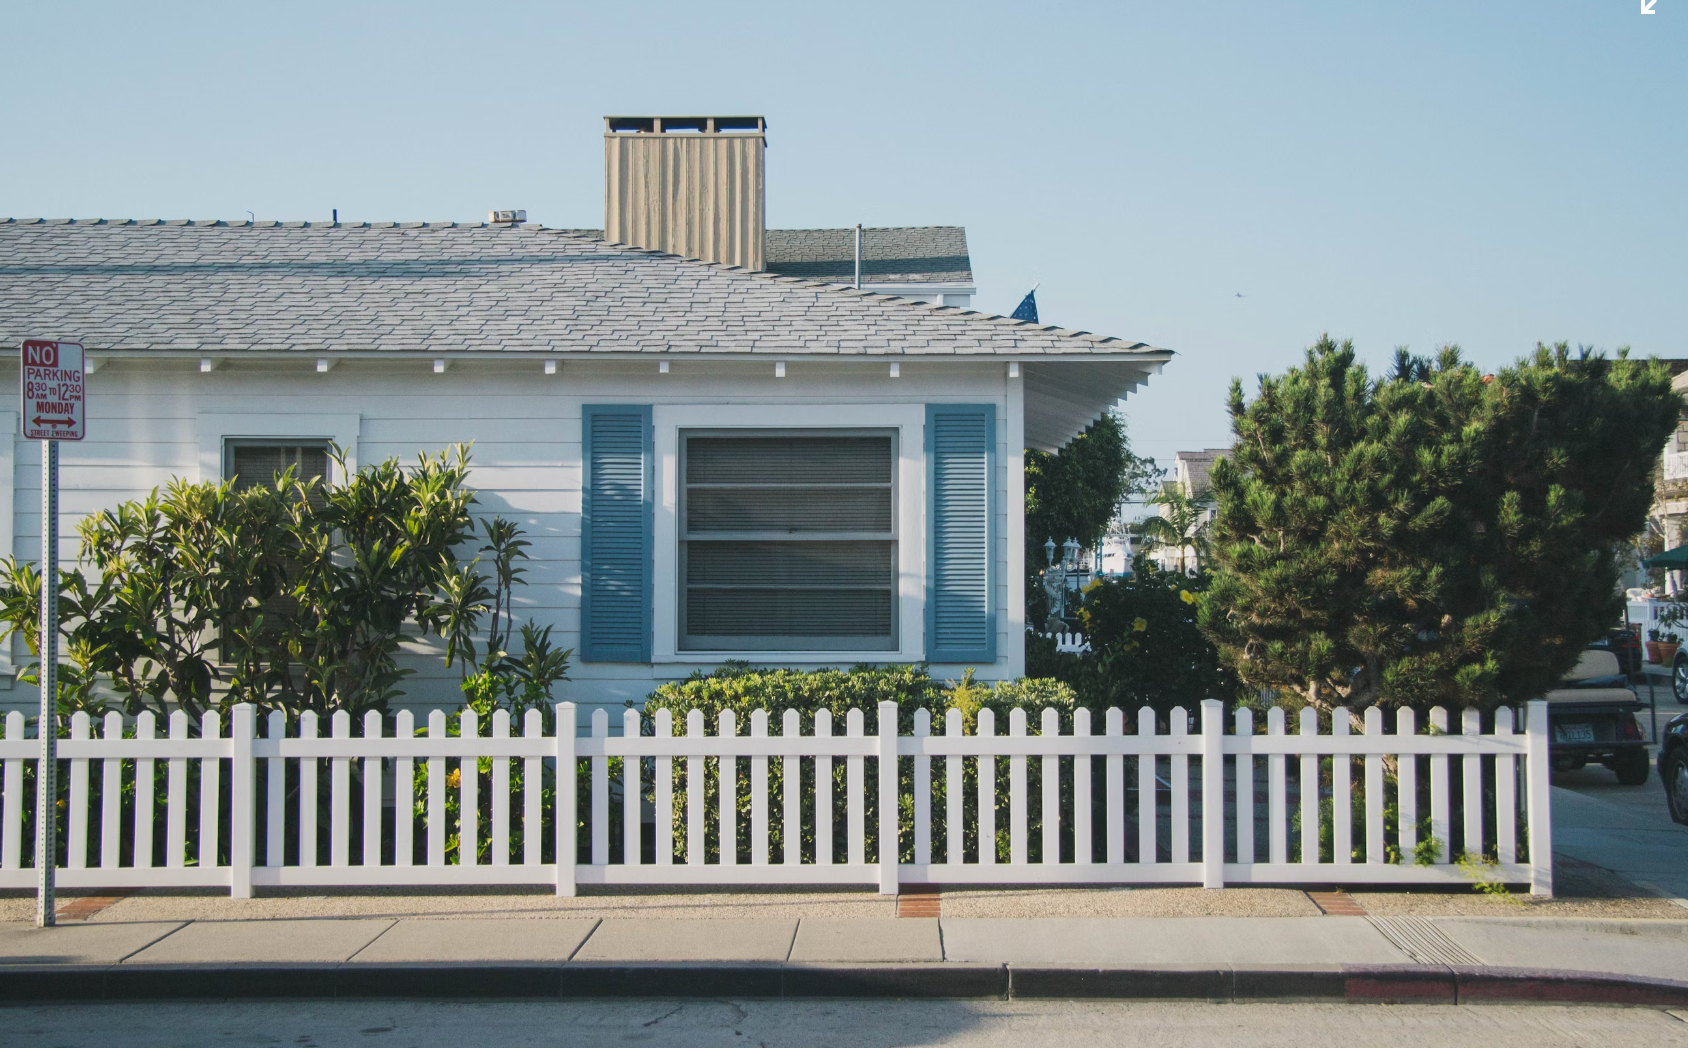 San Diego Short Term Rental Regulation: A Guide For Airbnb Hosts